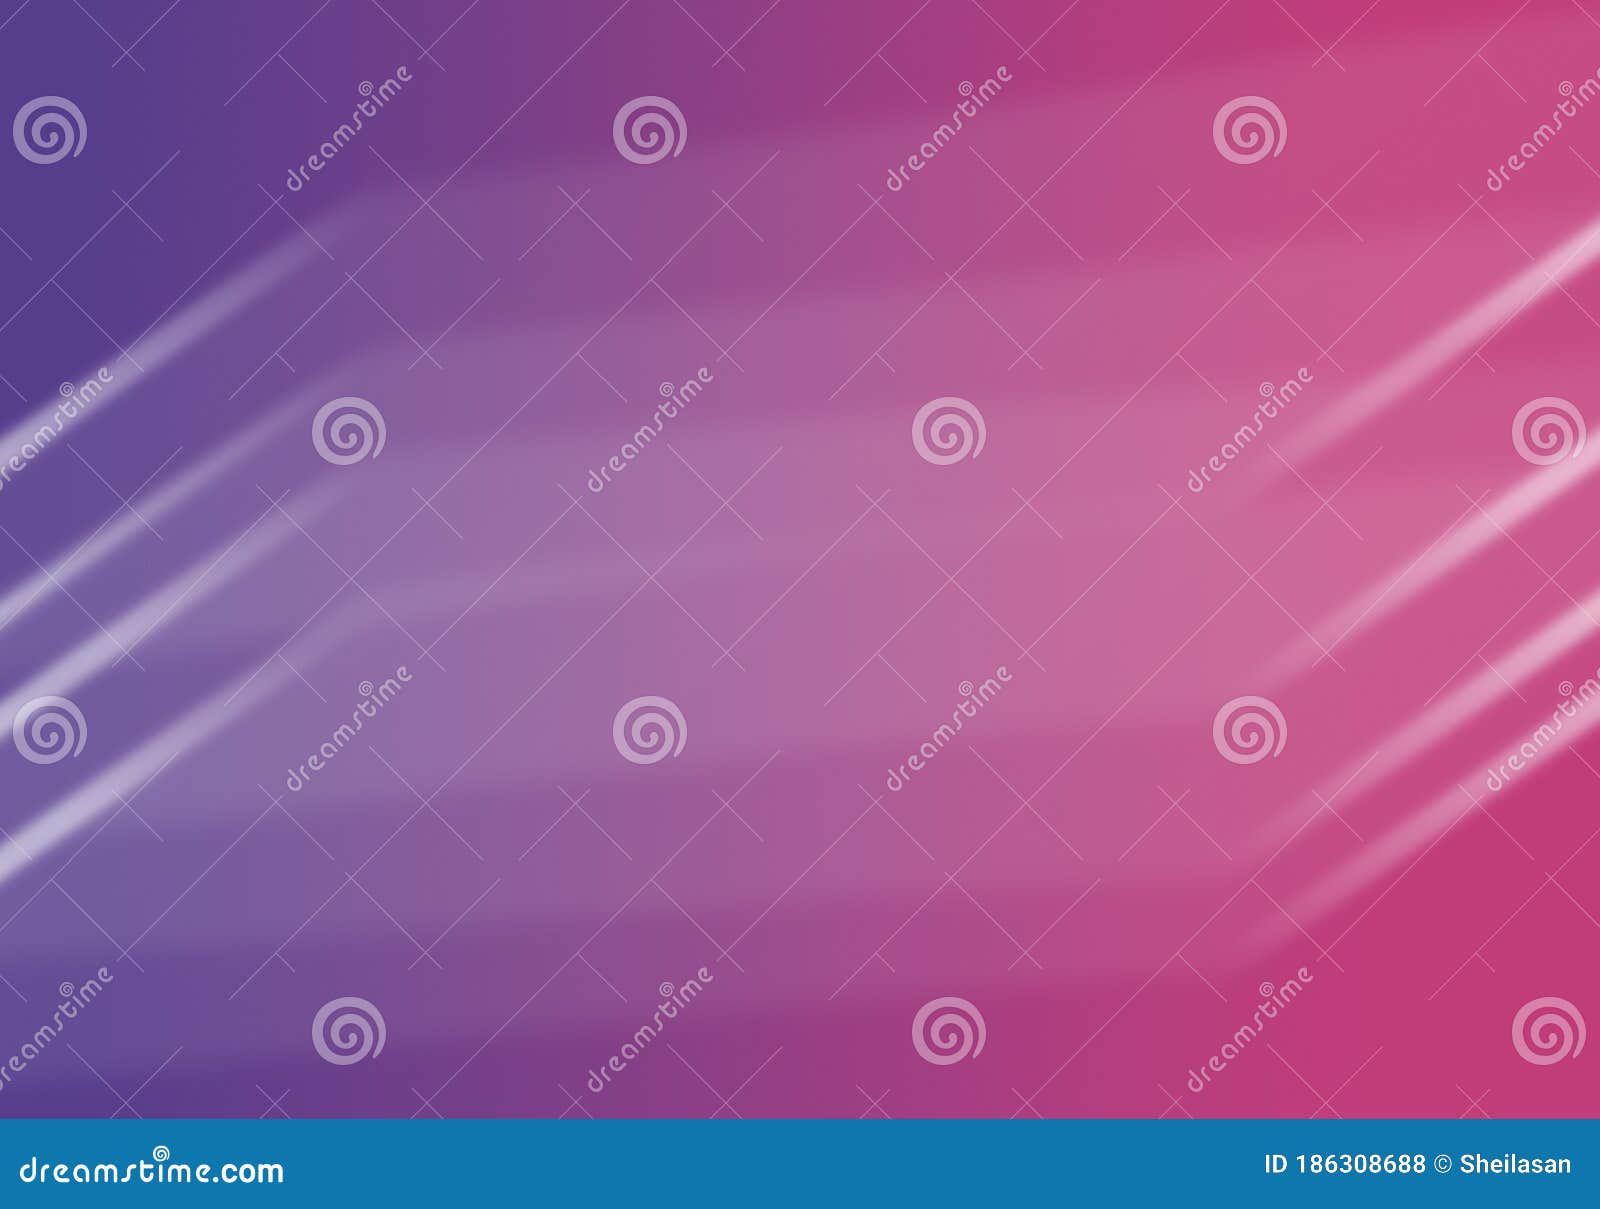 background abstract - purple and pink